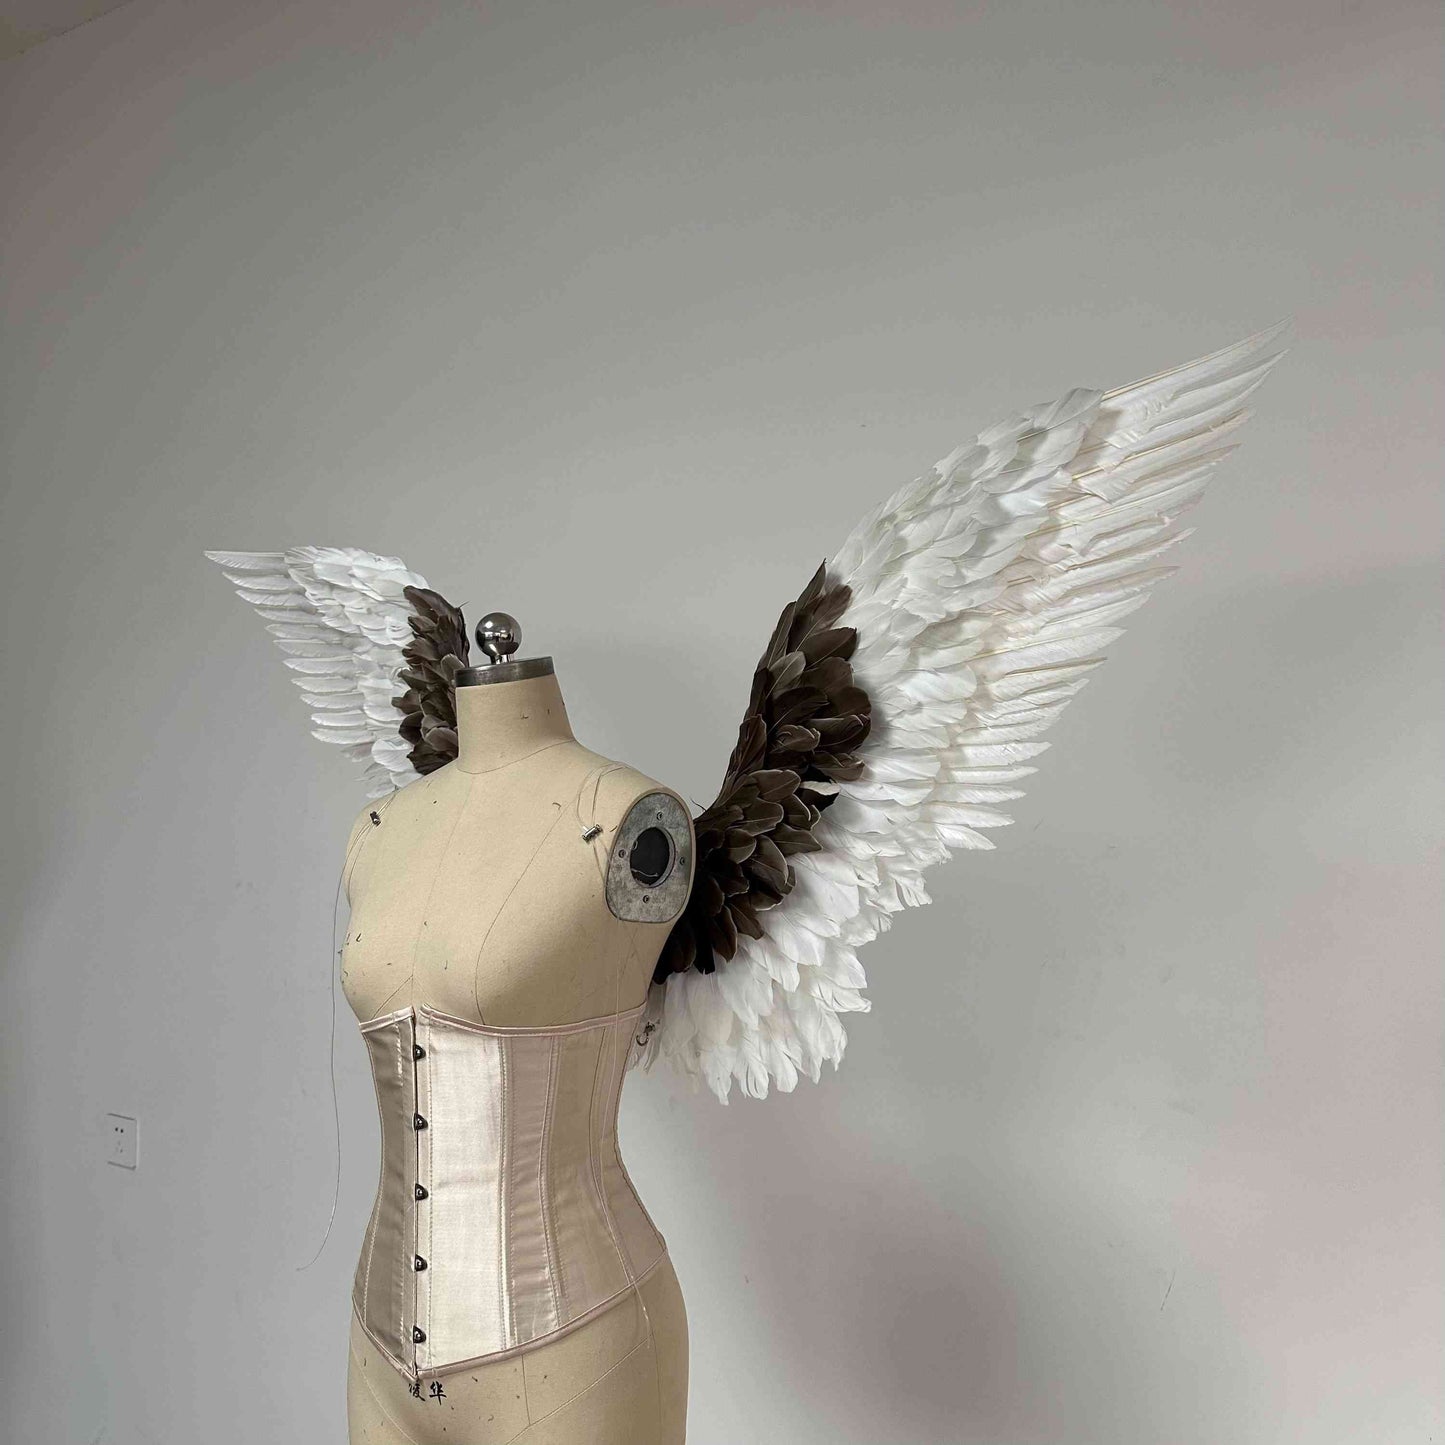 Our white gray angel wings from the left side. Made from goose feathers. Wings for angel wings costume. Suitable for photoshoots.